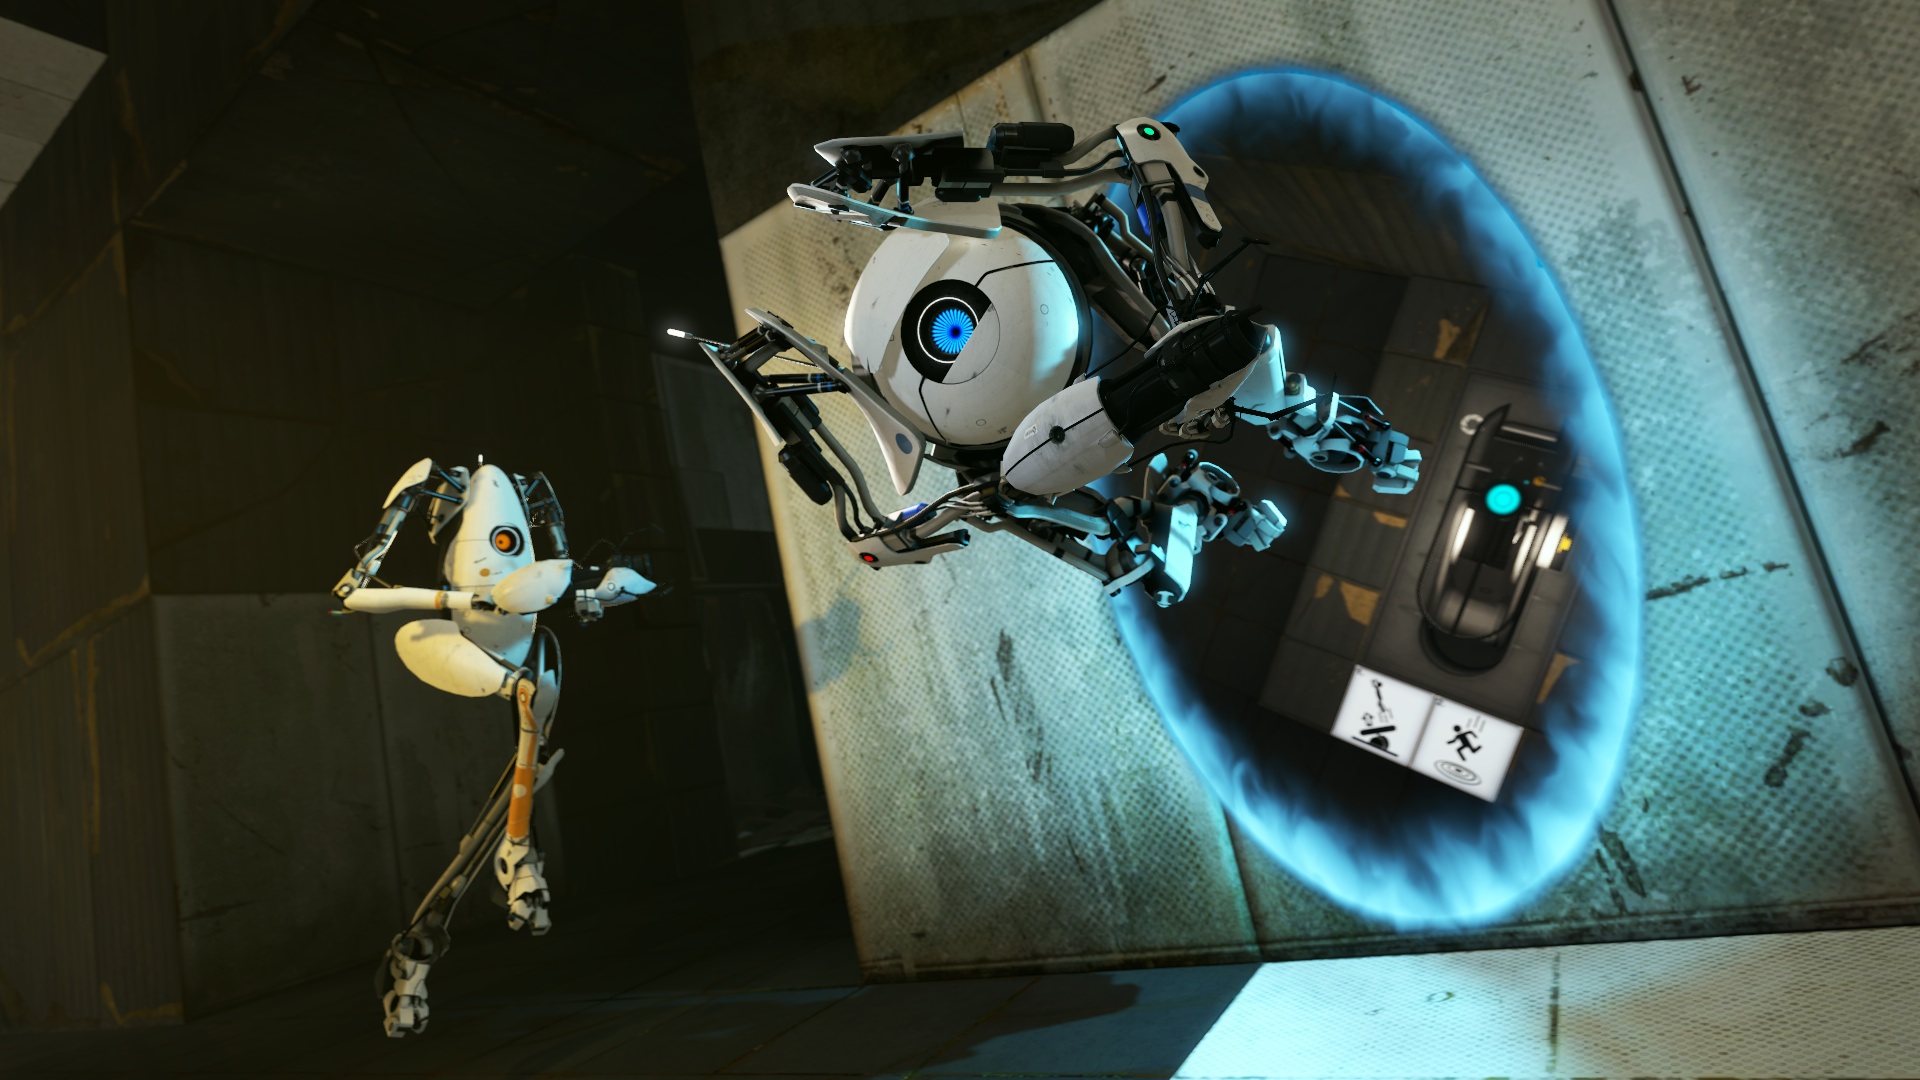 Best co-op games - Portal 2 - One player robot dives through a blue portal while the other leaps behind them